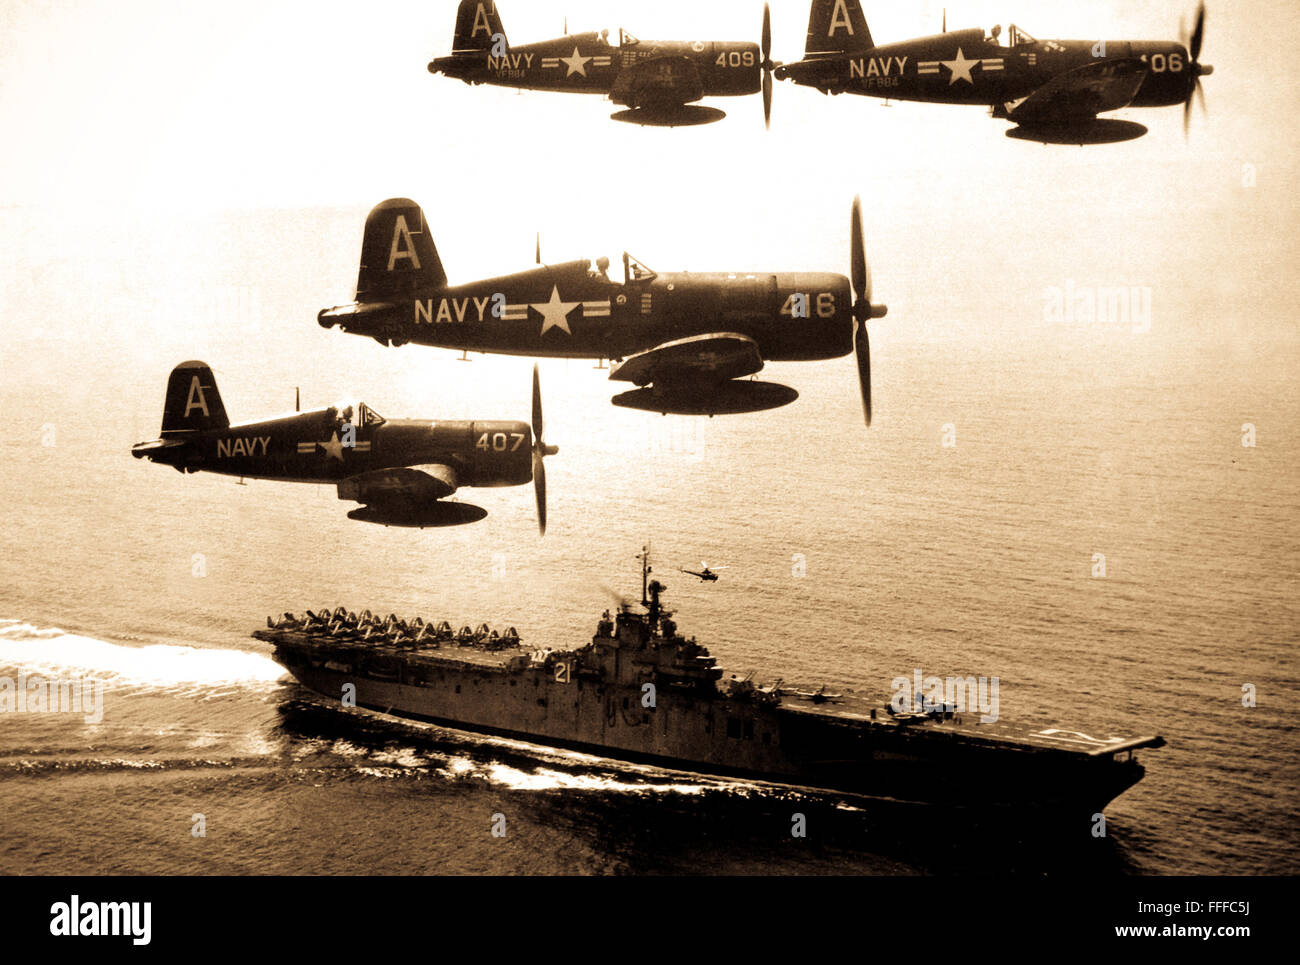 F4U's (Corsairs) returning from a combat mission over North Korea circle the USS Boxer as they wait for planes in the next strike to be launched from her flight deck - a helicopter hovers above the ship.  September 4, 1951. (Navy) Stock Photo